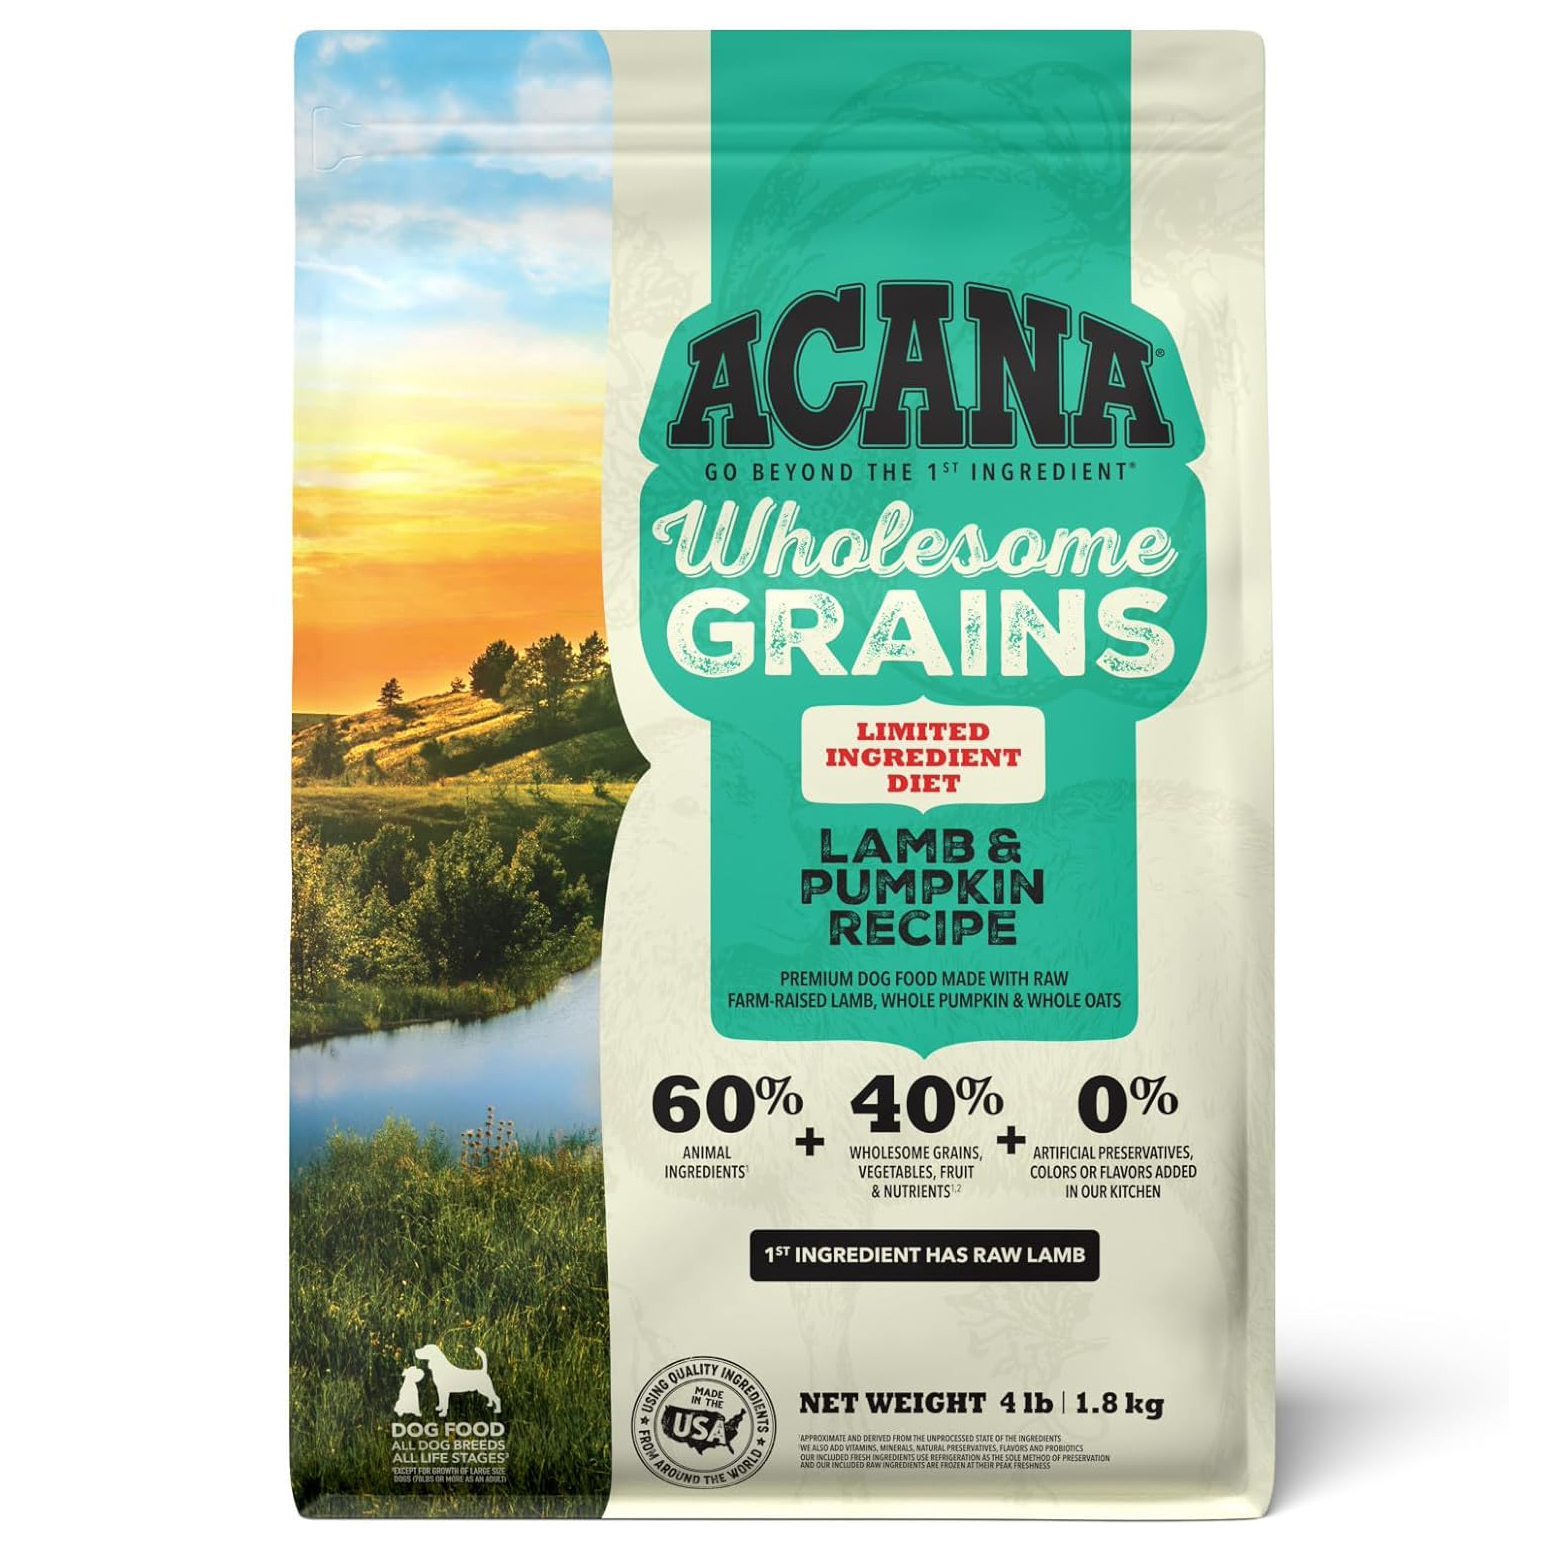 ACANA Singles + Wholesome Grains Dry Dog Food